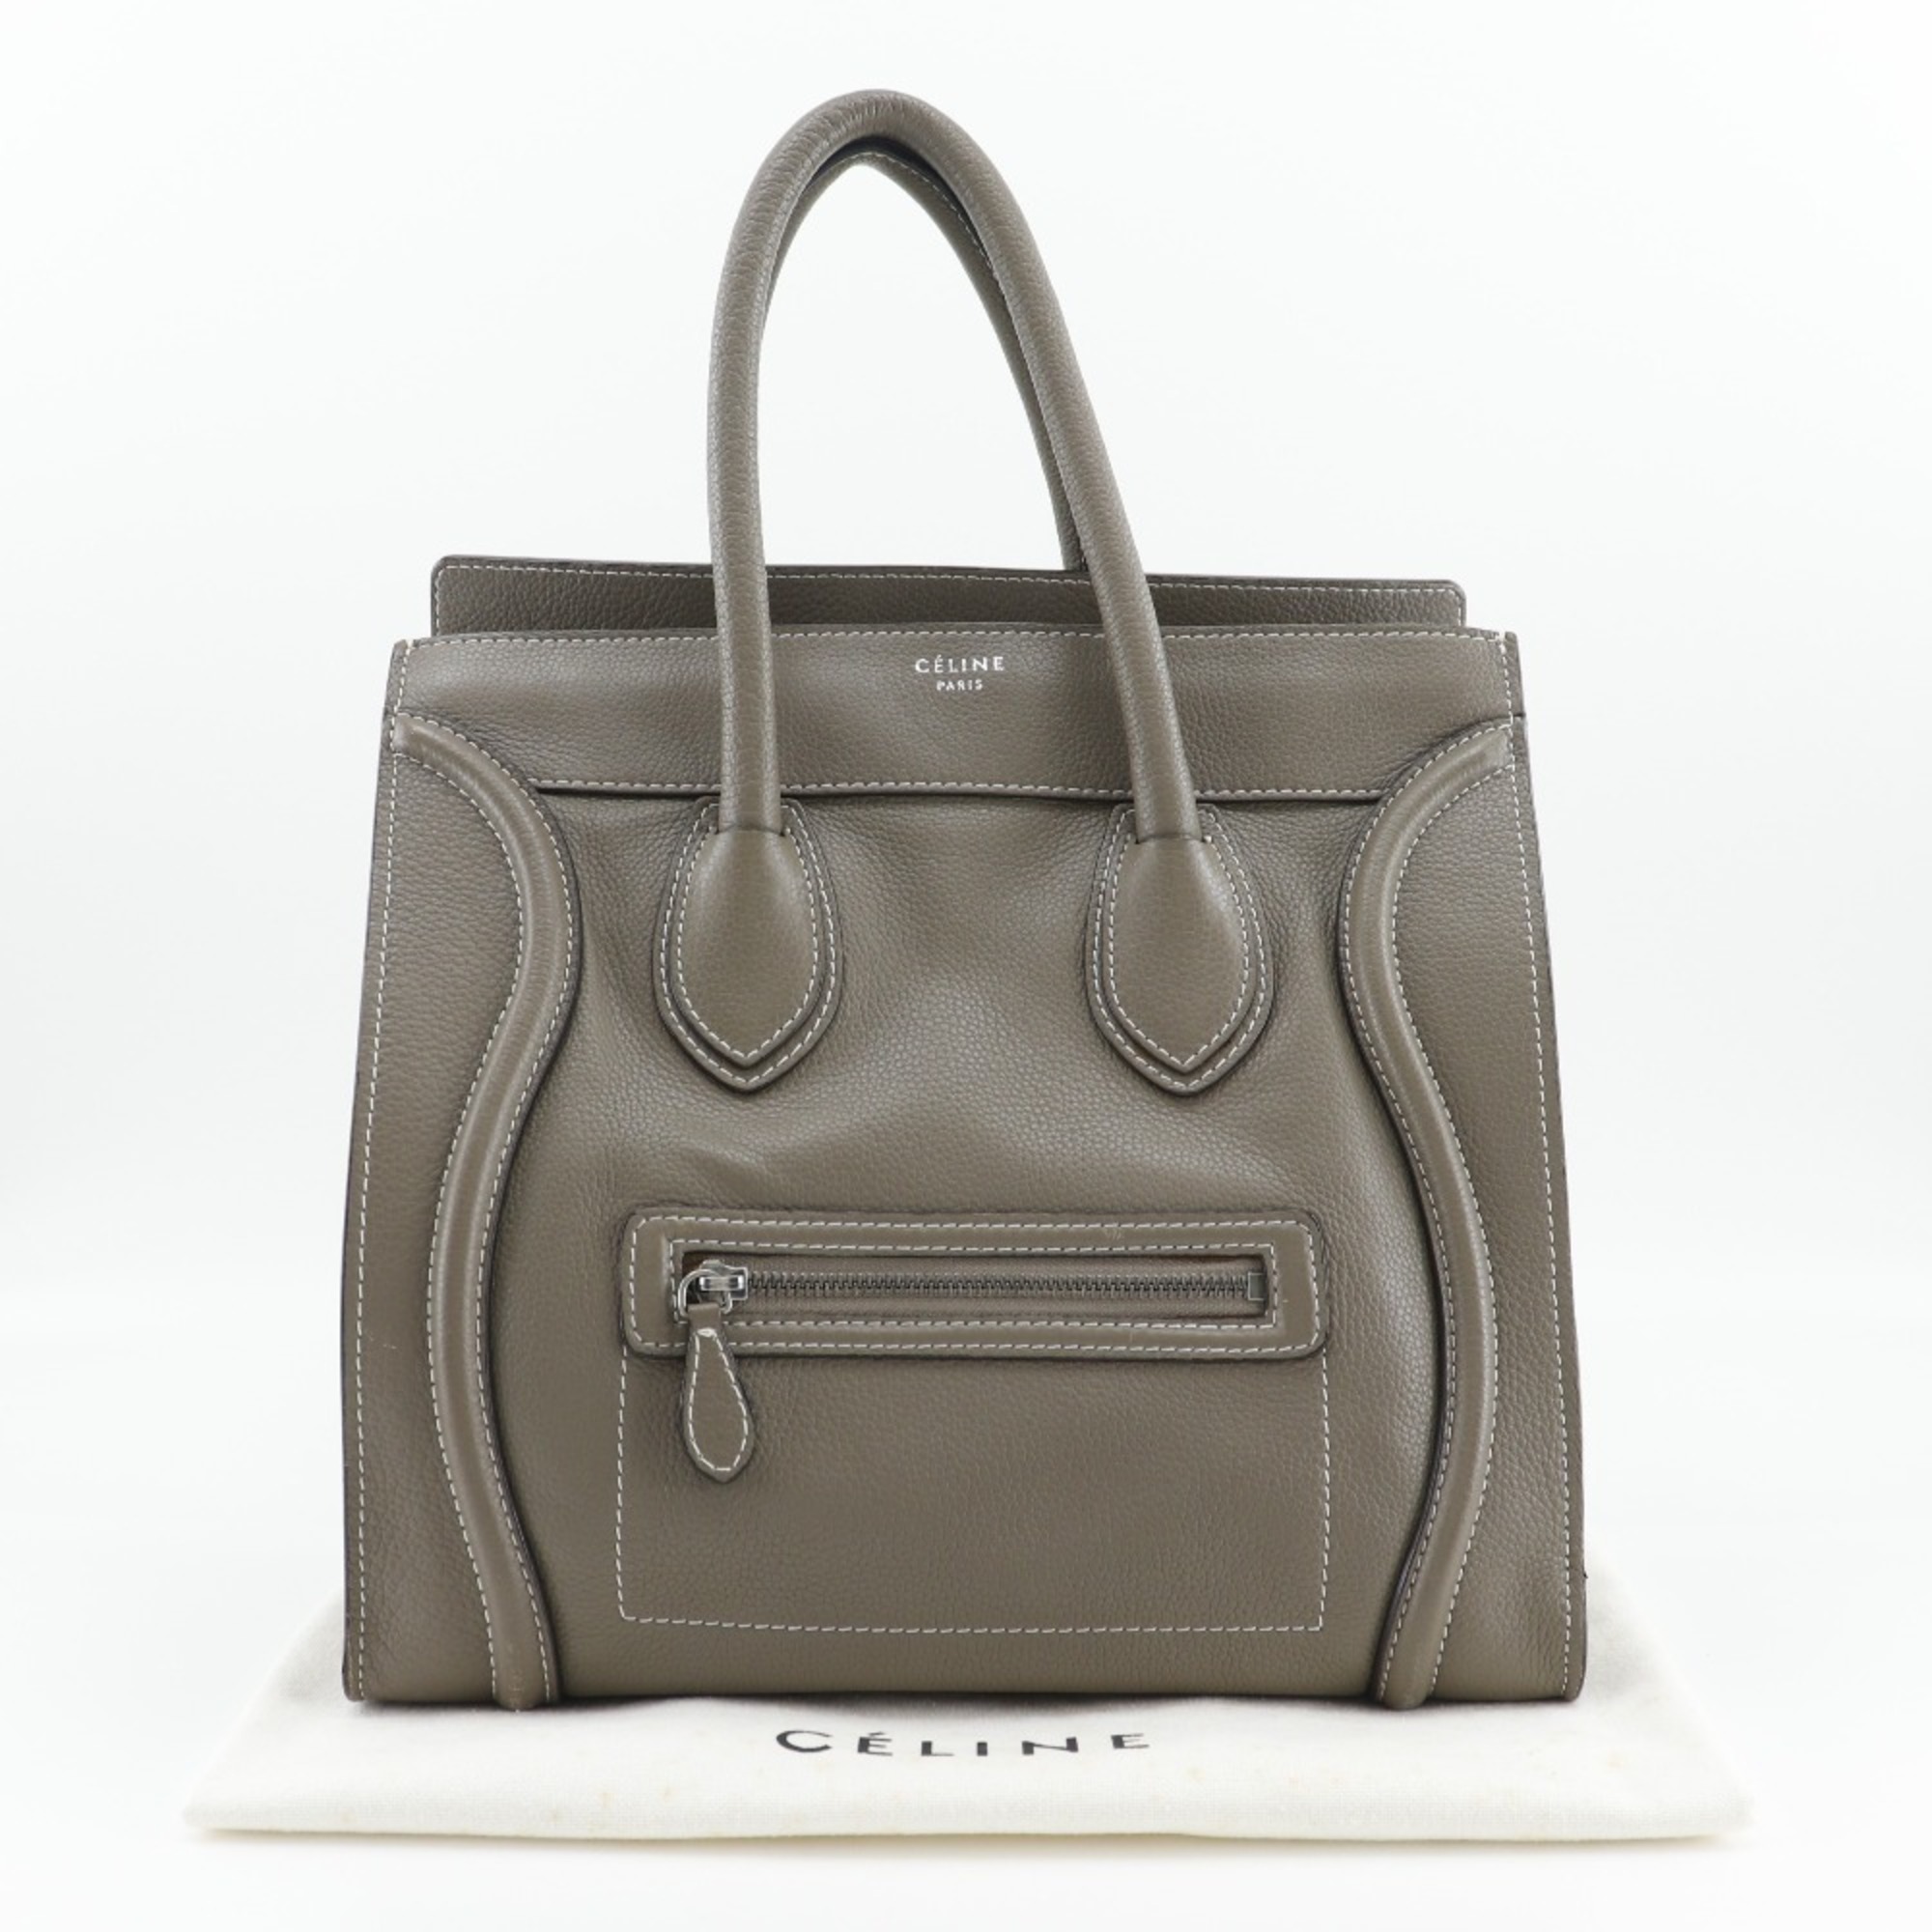 CELINE Luggage Tote Bag Leather Mini for Women